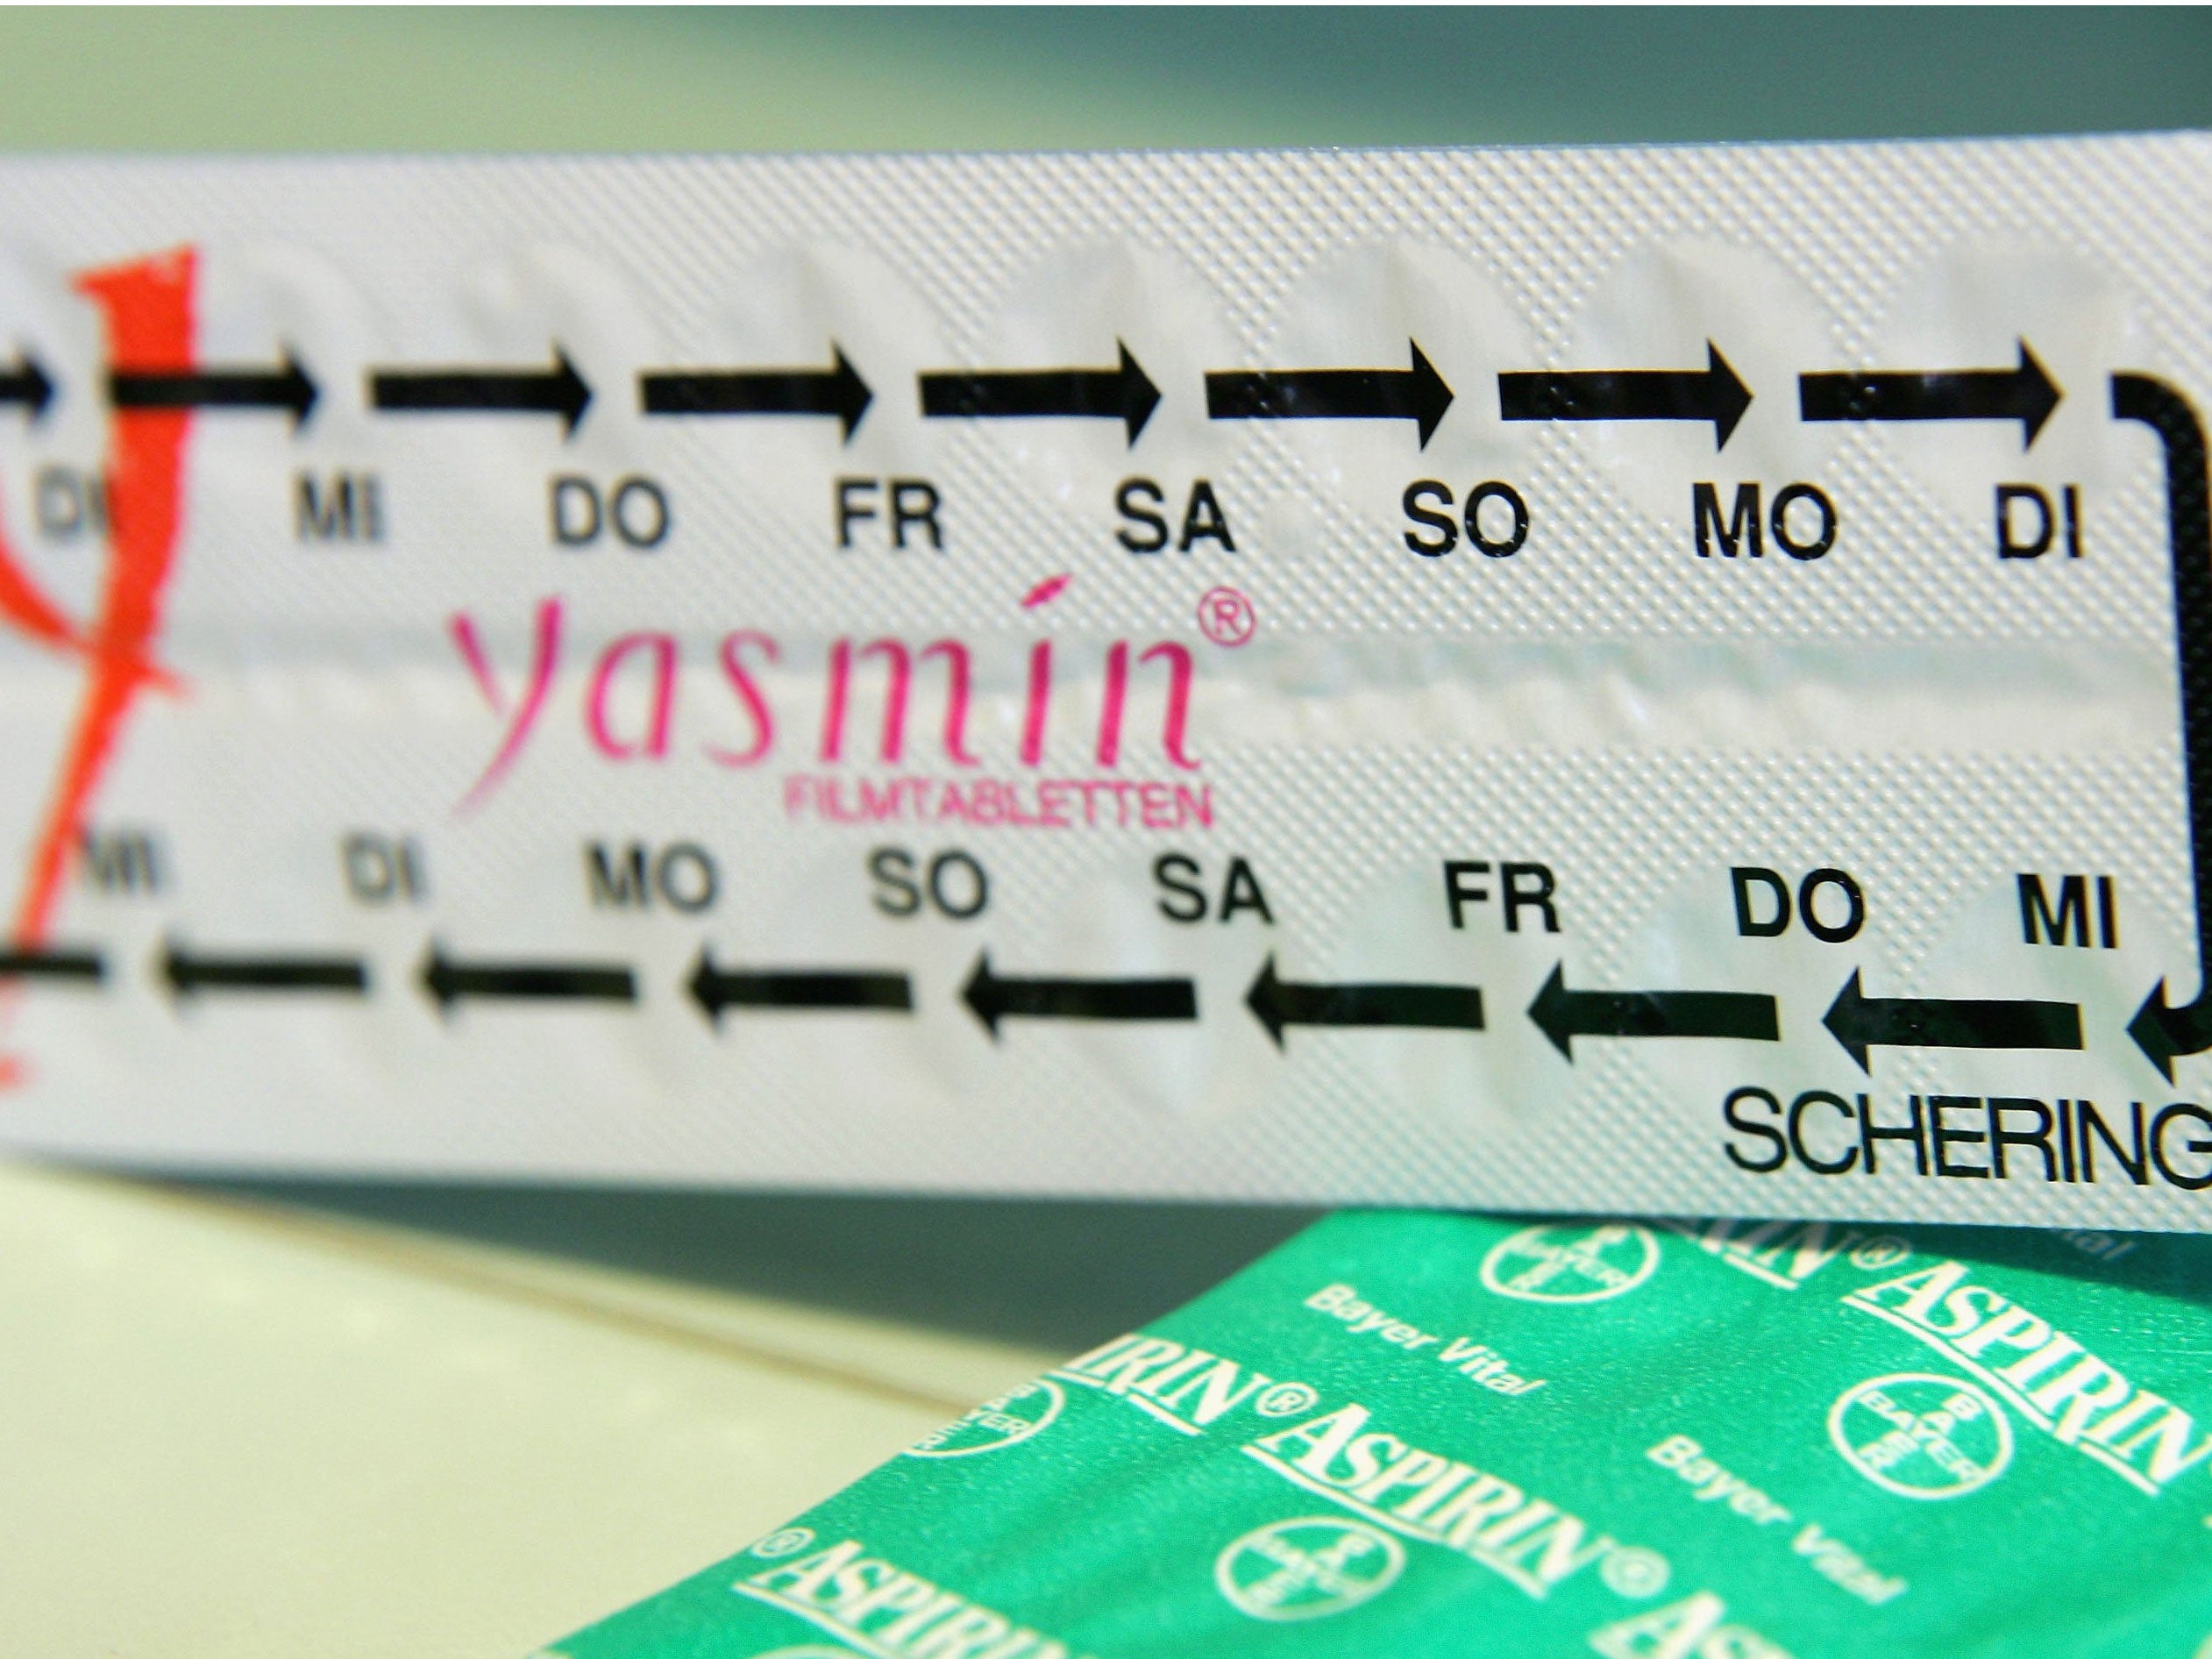 Yasmin is one of the birth-control pills being cited as a potential danger